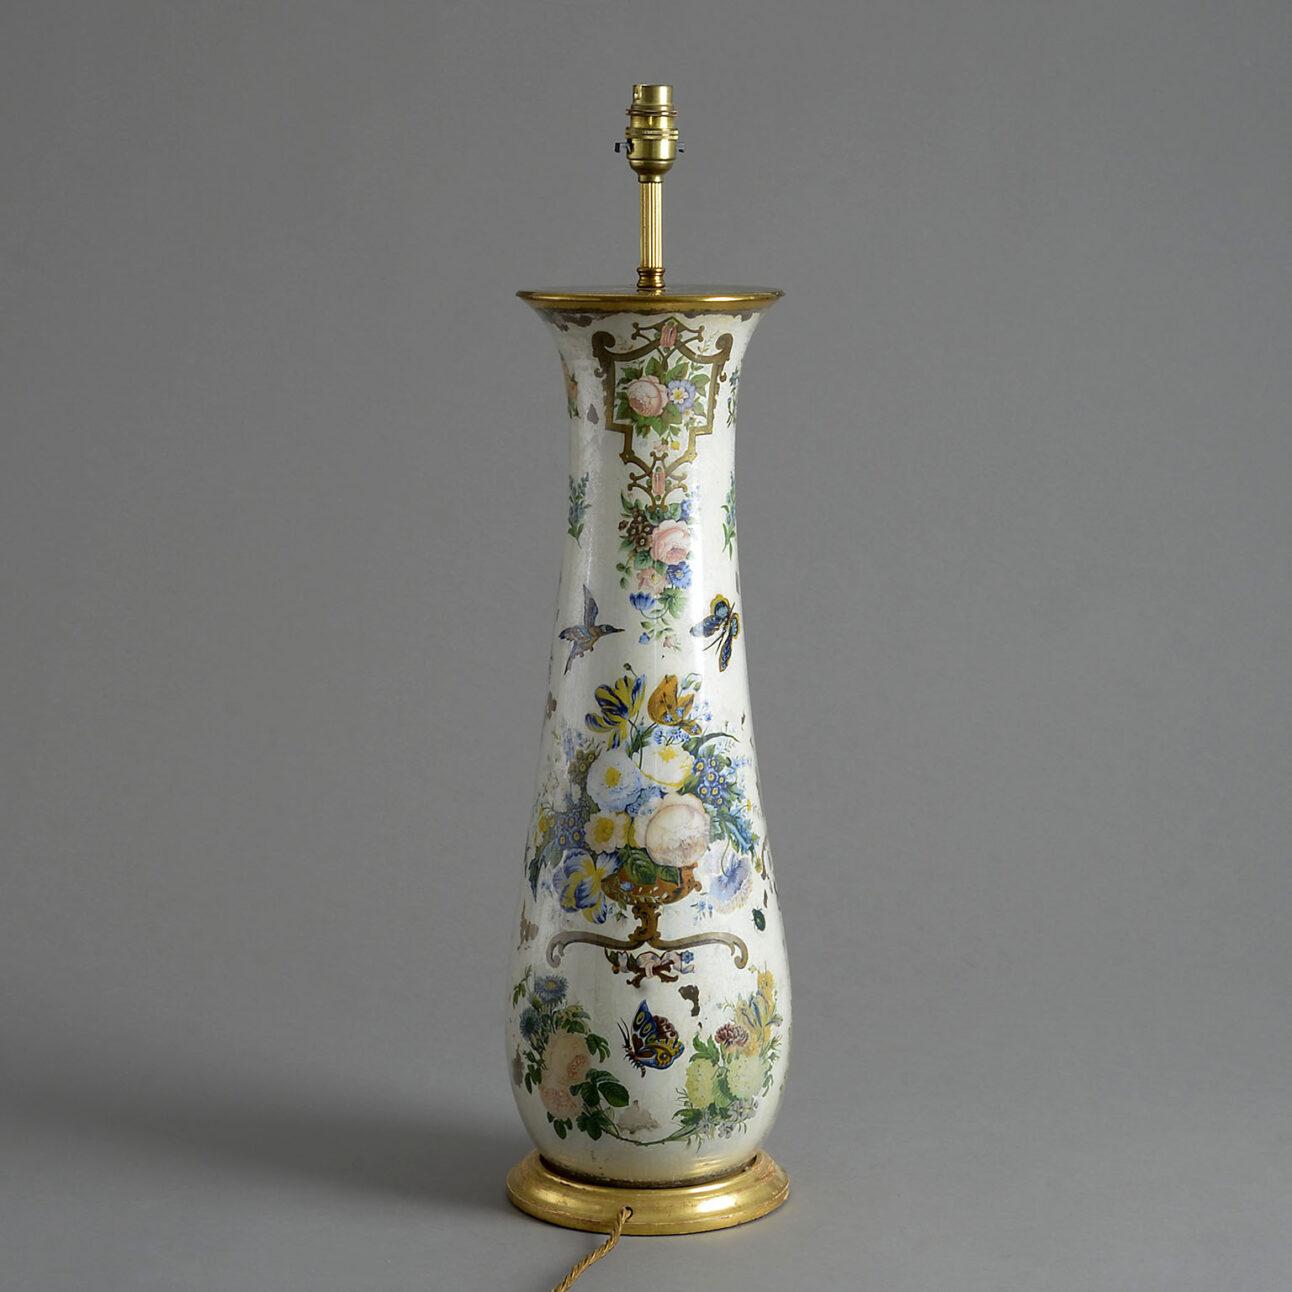 A tall 19th century Victorian vase of elongated form decorated with flowers and birds upon a cream coloured ground. Set upon a turned giltwood base and wired as a lamp with silk flex.

Wired to UK Standards. This lamp can be re-wired to any